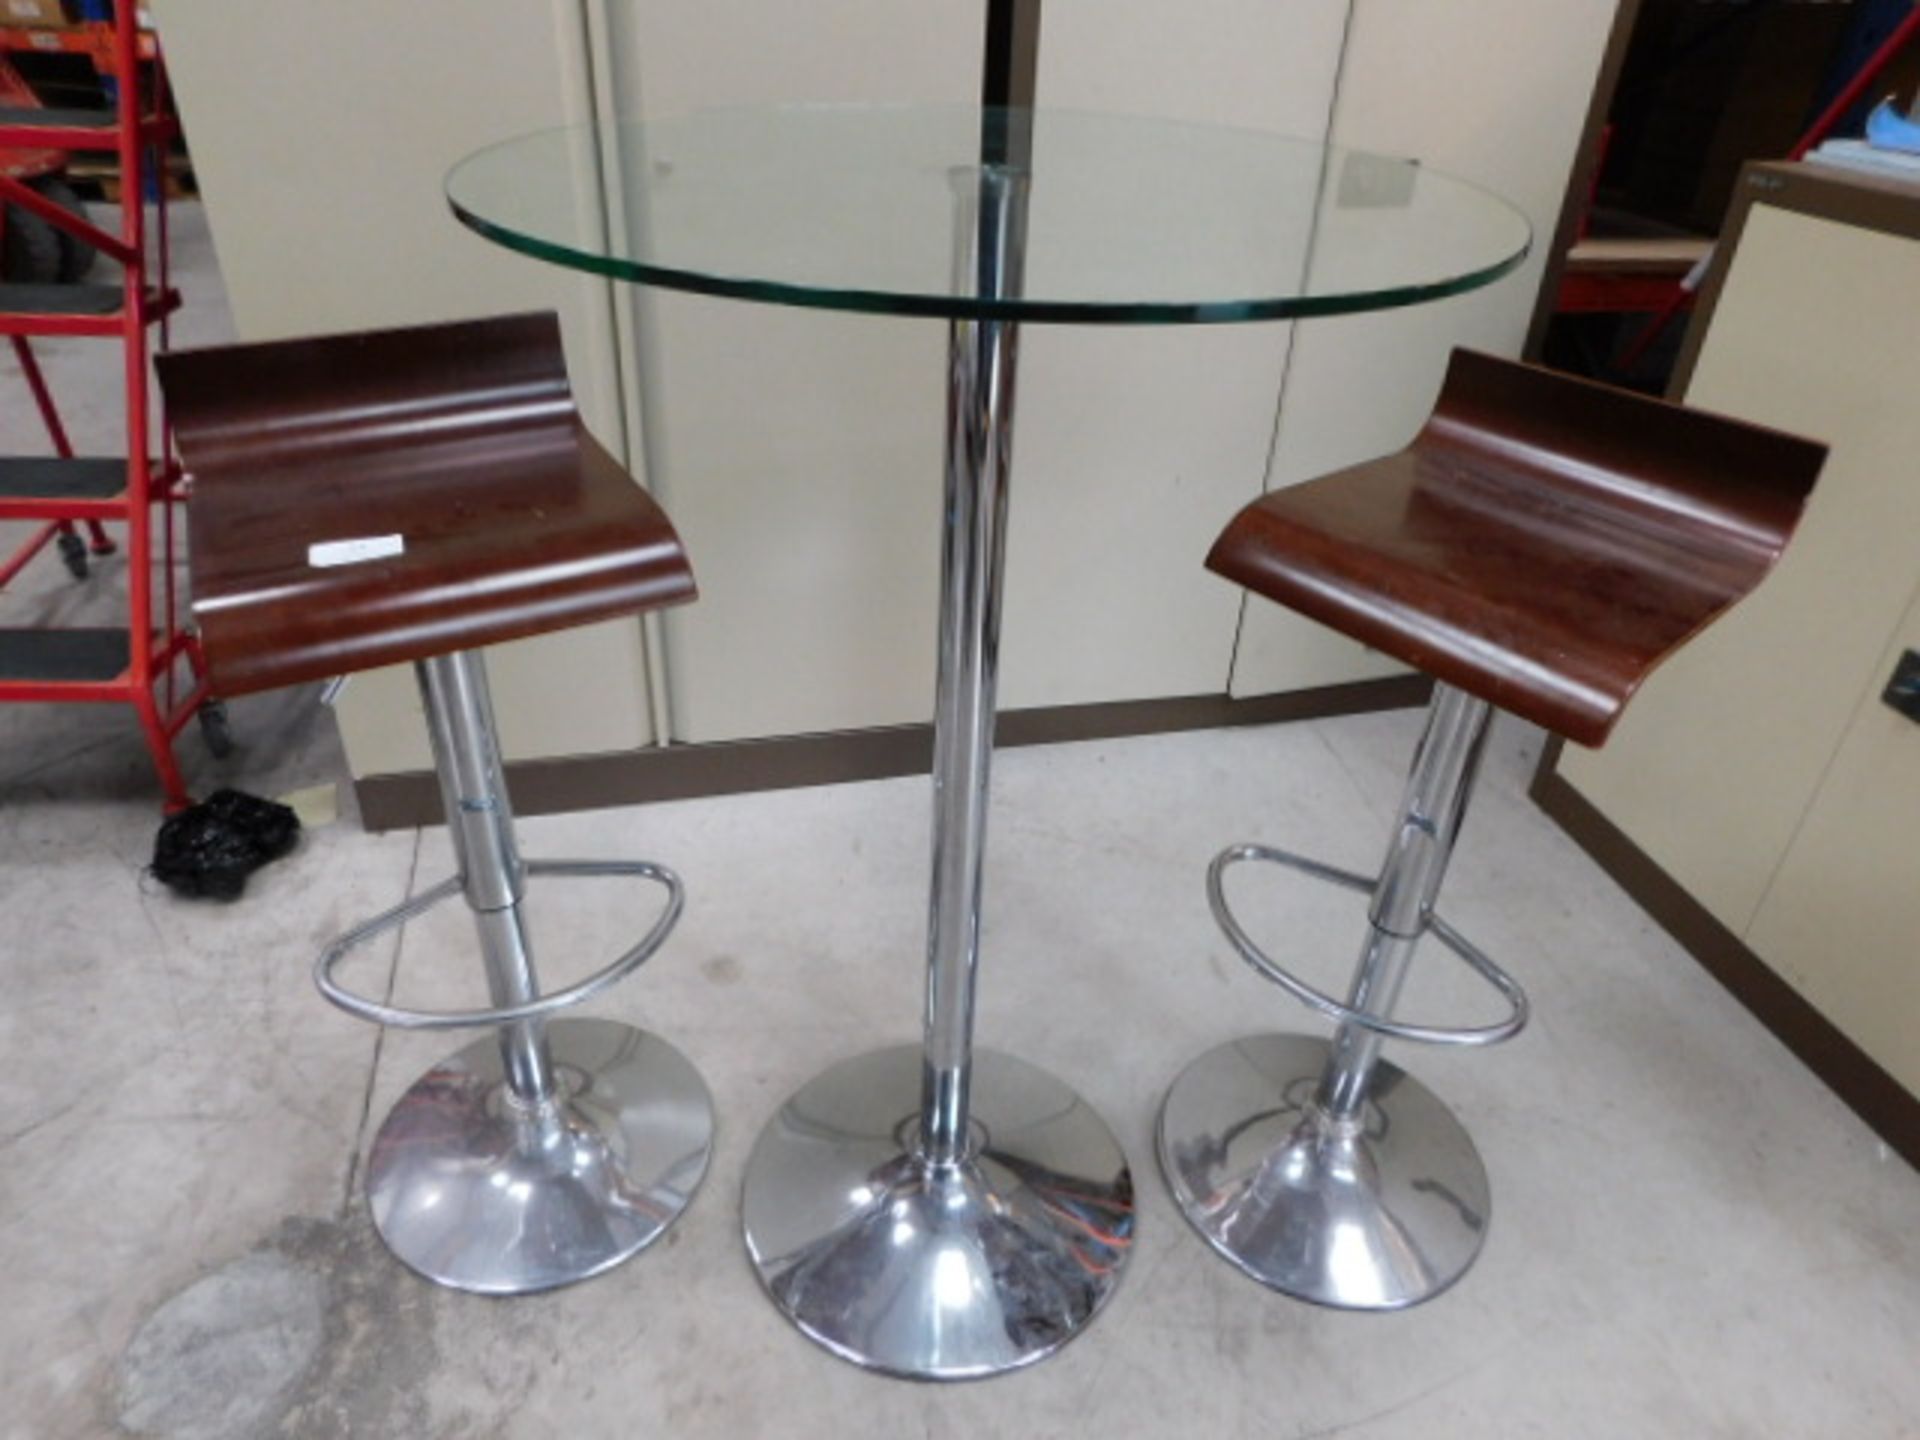 * Two Adjustable Bar Stools and Glass Topped Table